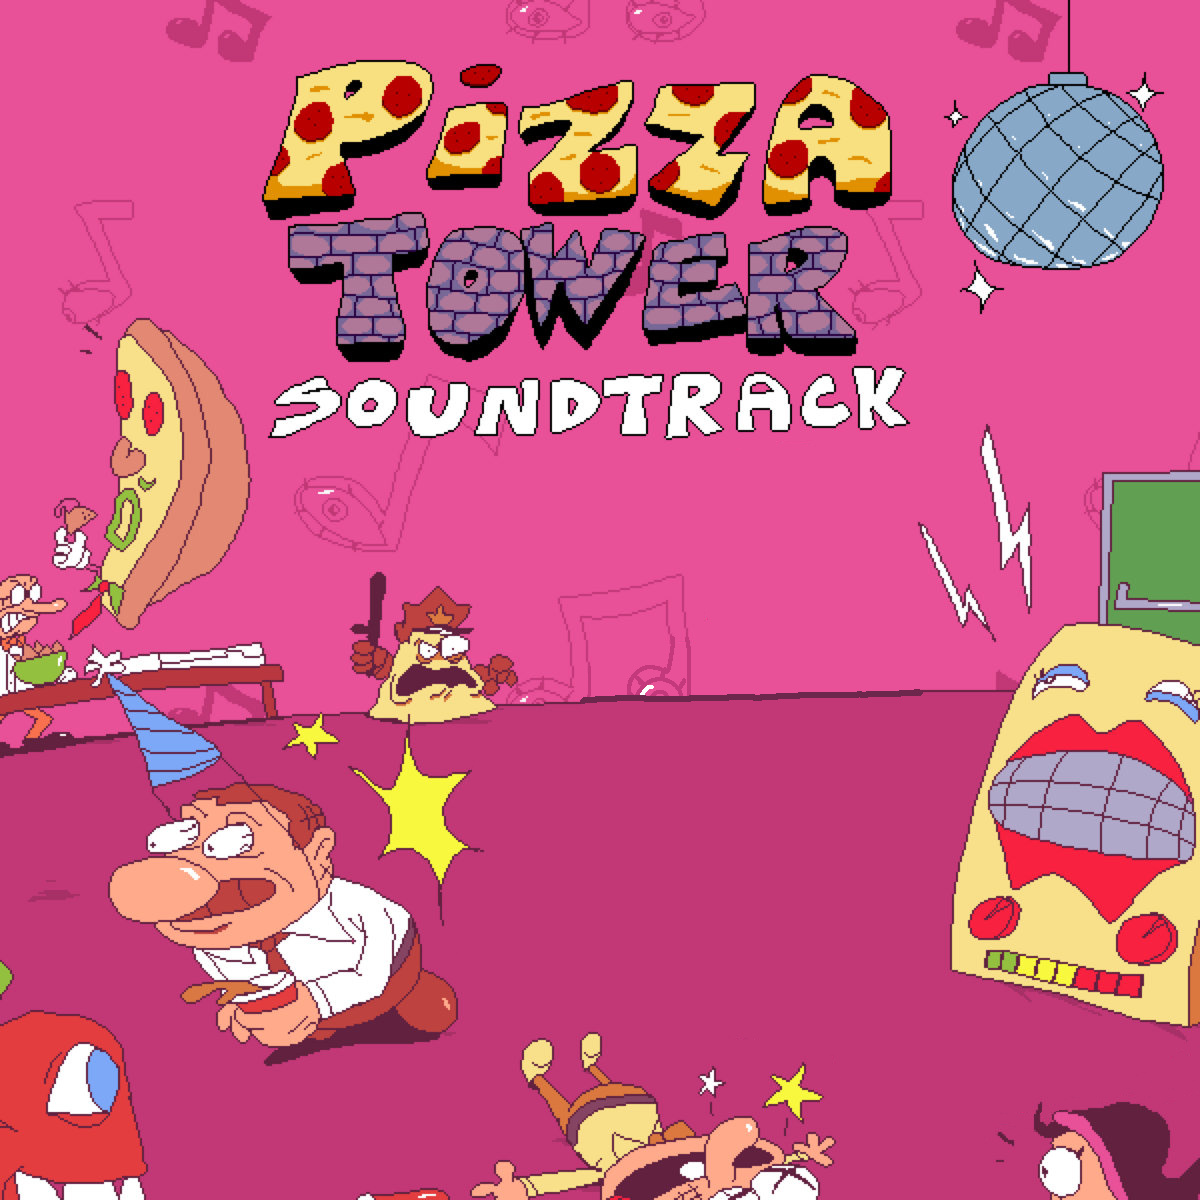 Pizza tower album cover template by Bunnylover2009 on DeviantArt